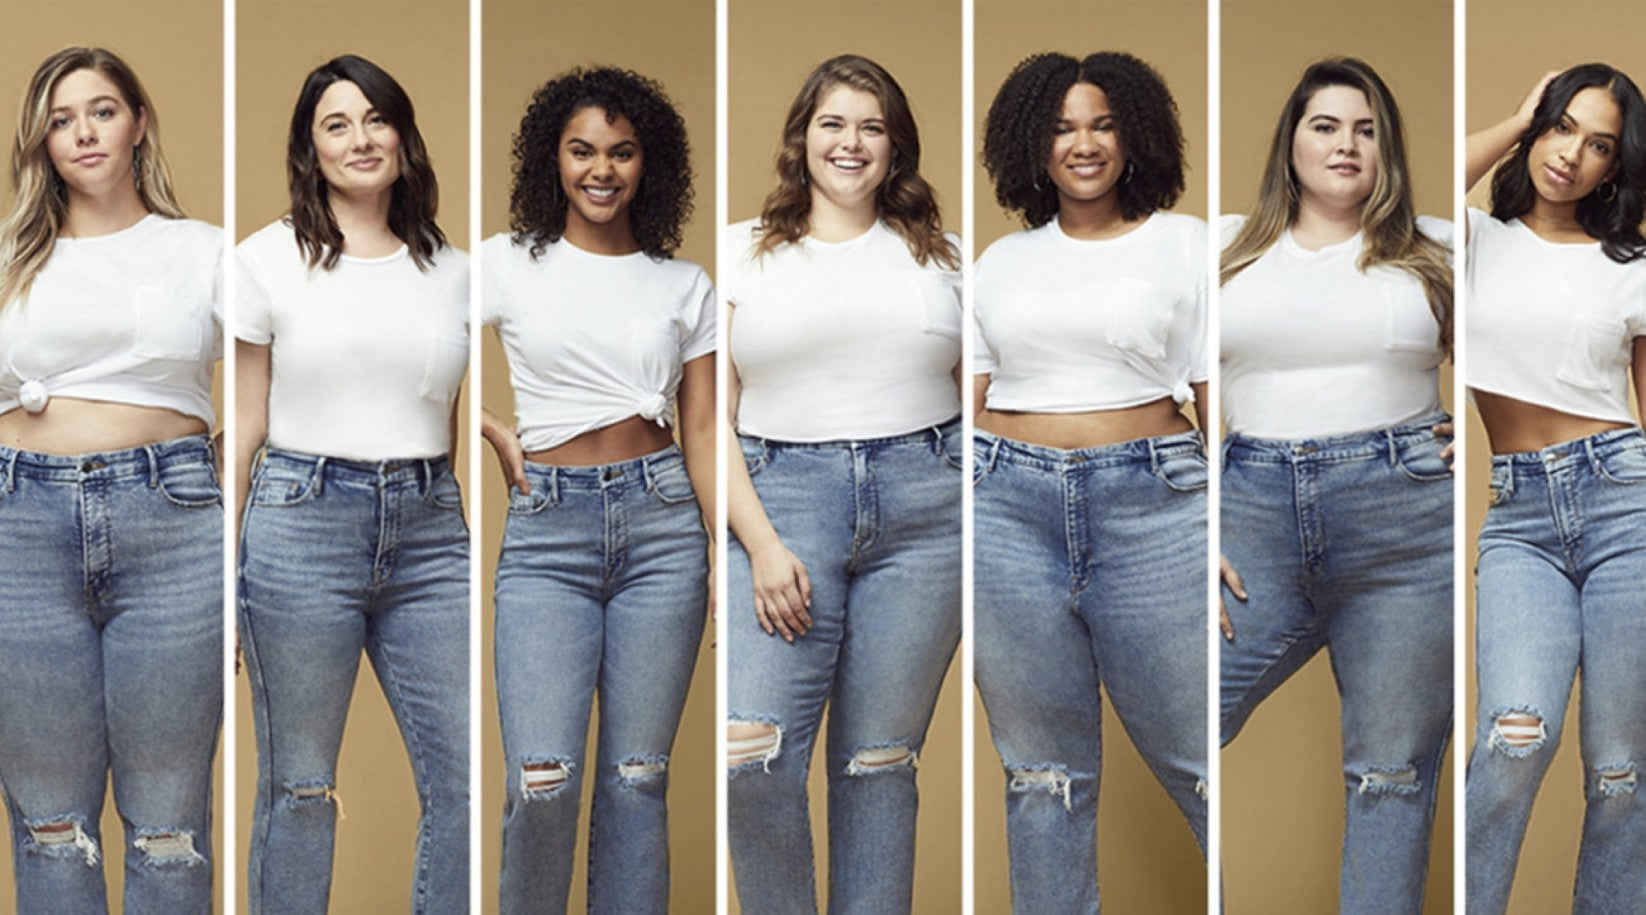 Seven models of all sizes are shown side-by-side, all wearing white tops and light wash jeans.